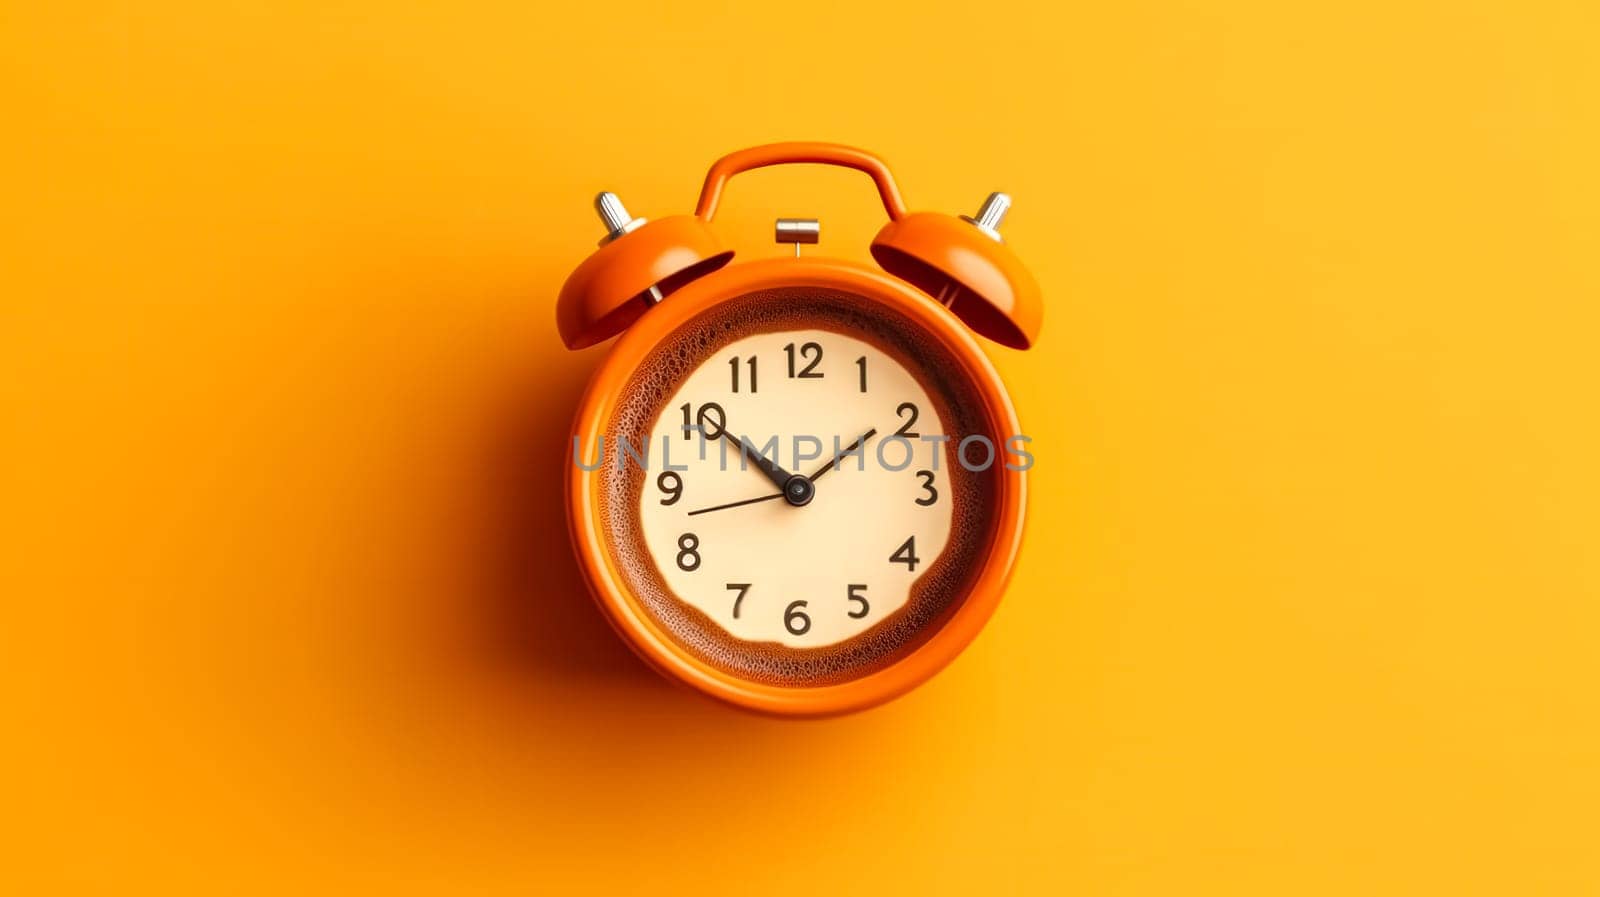 A conceptual image portraying hot coffee served in a yellow retro alarm clock against a vibrant yellow background. Perfect for waking up and coffee themed concepts.